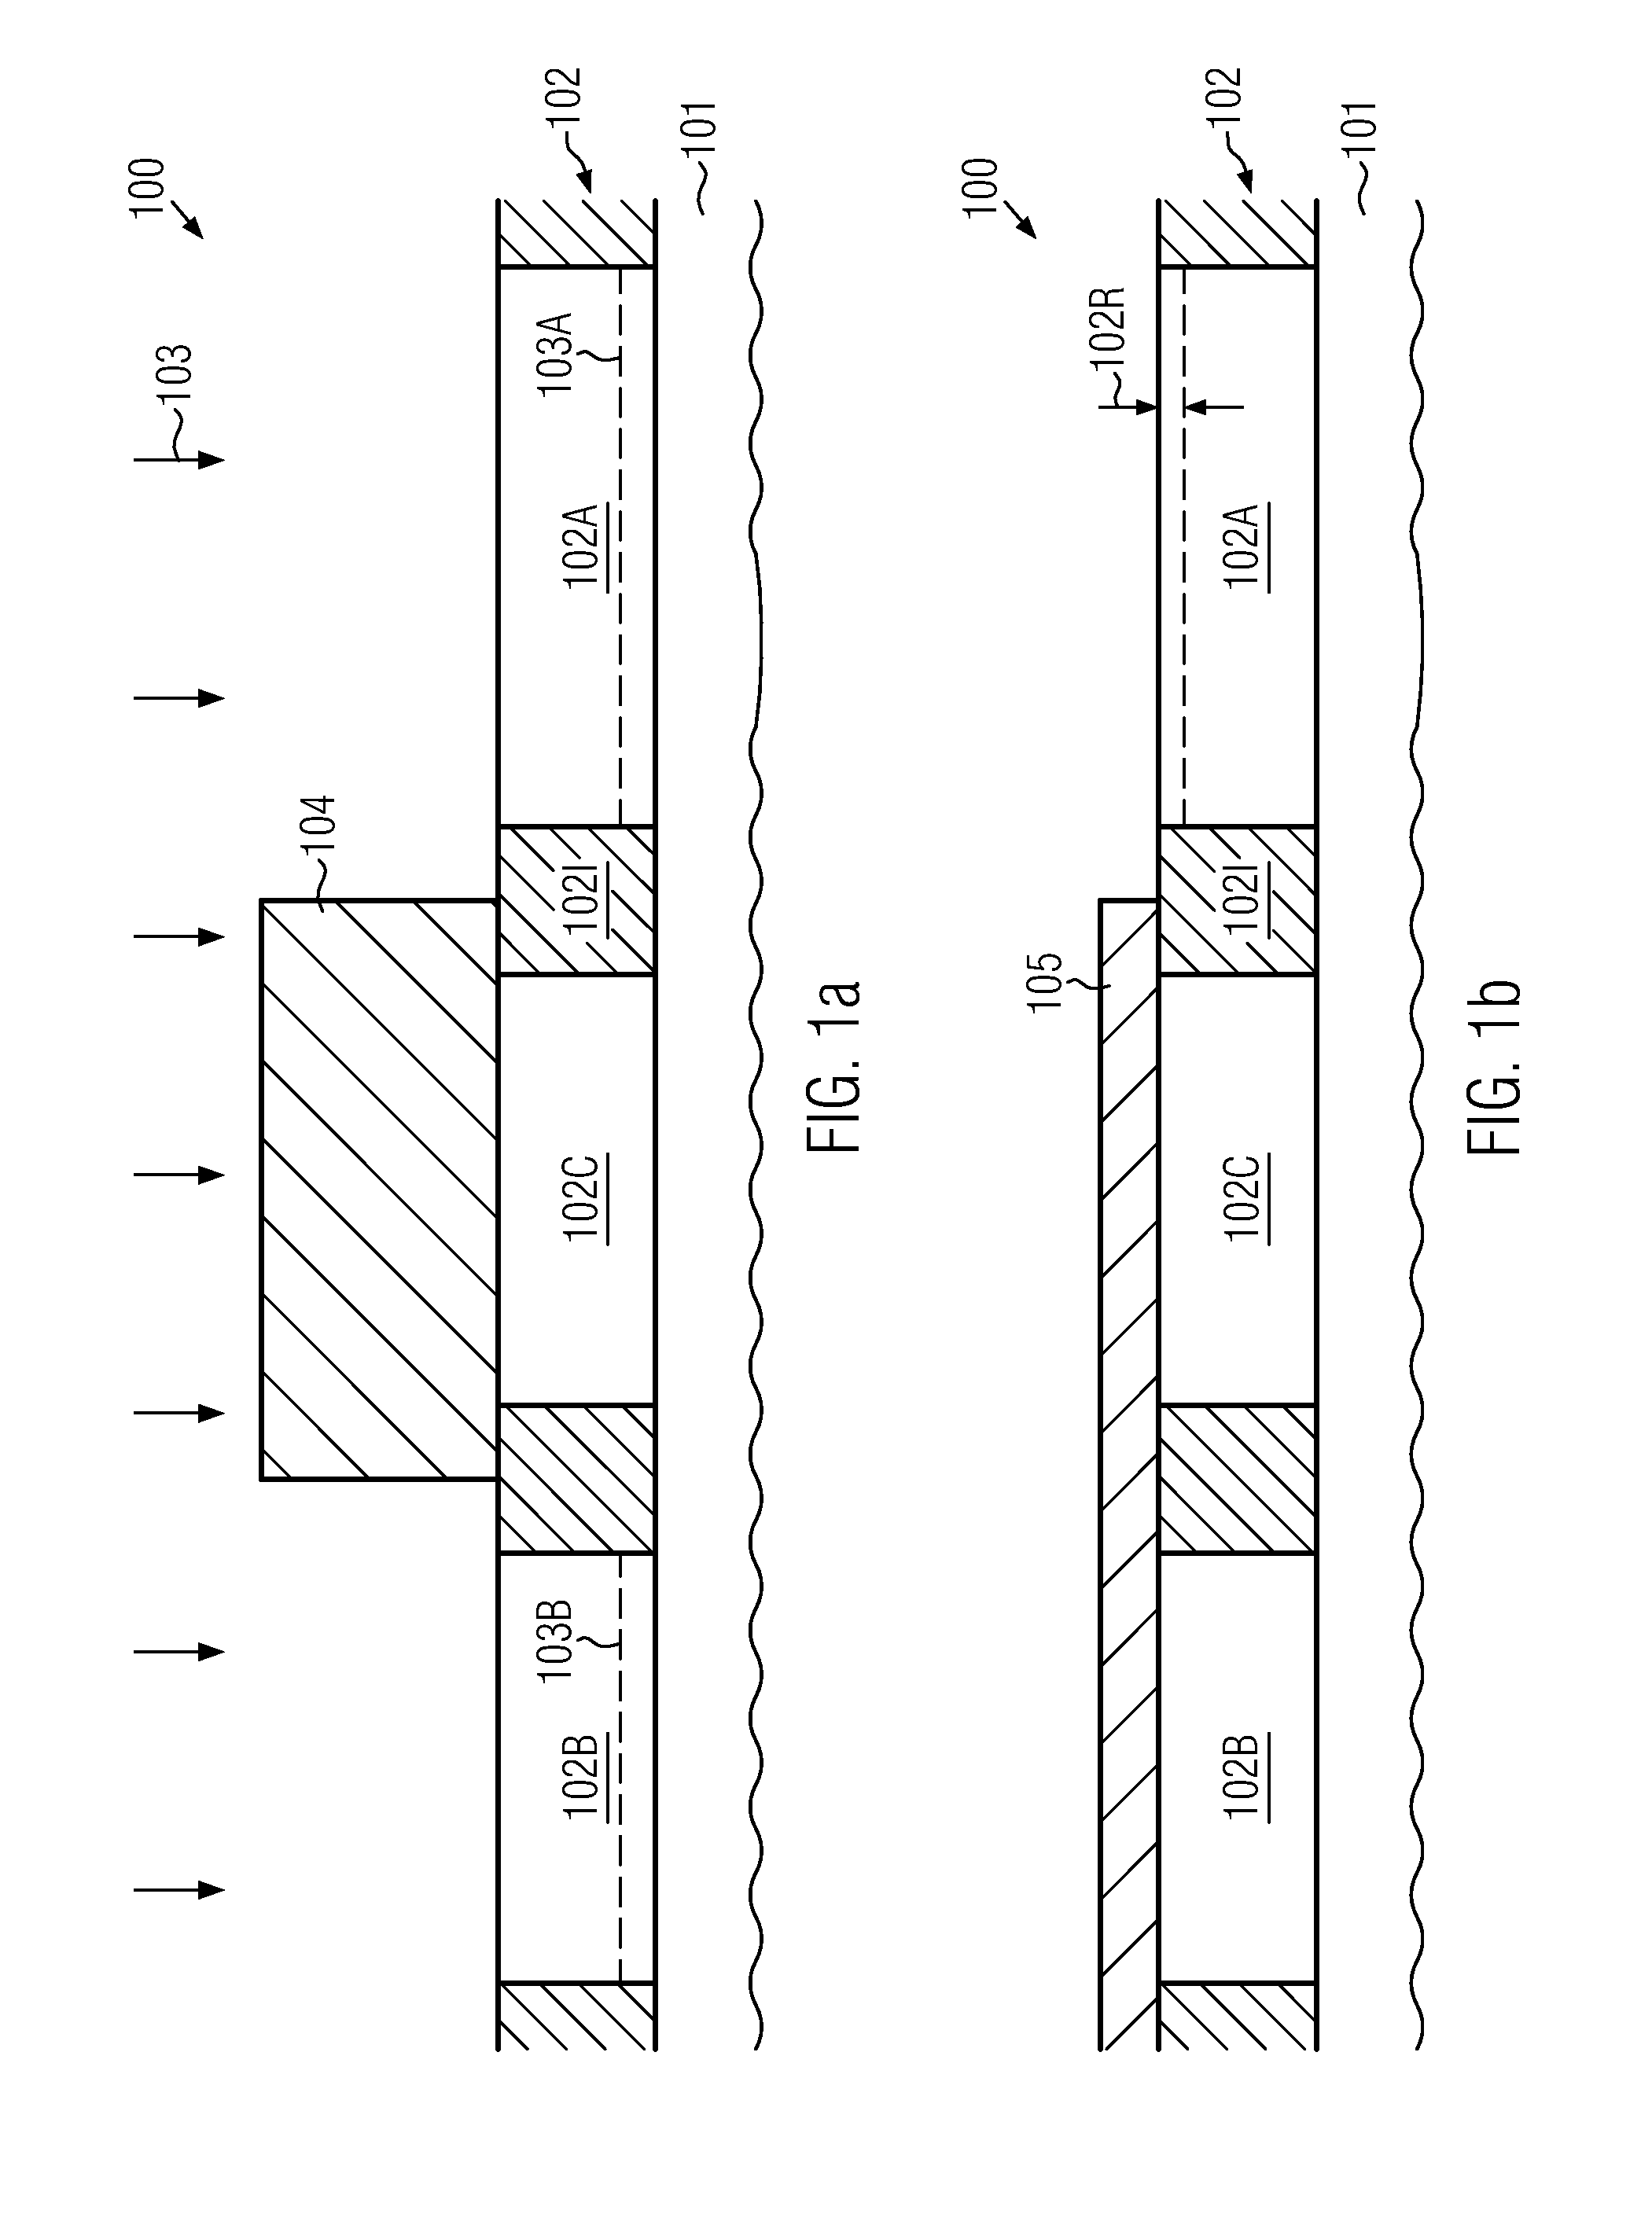 Differential threshold voltage adjustment in PMOS transistors by differential formation of a channel semiconductor material